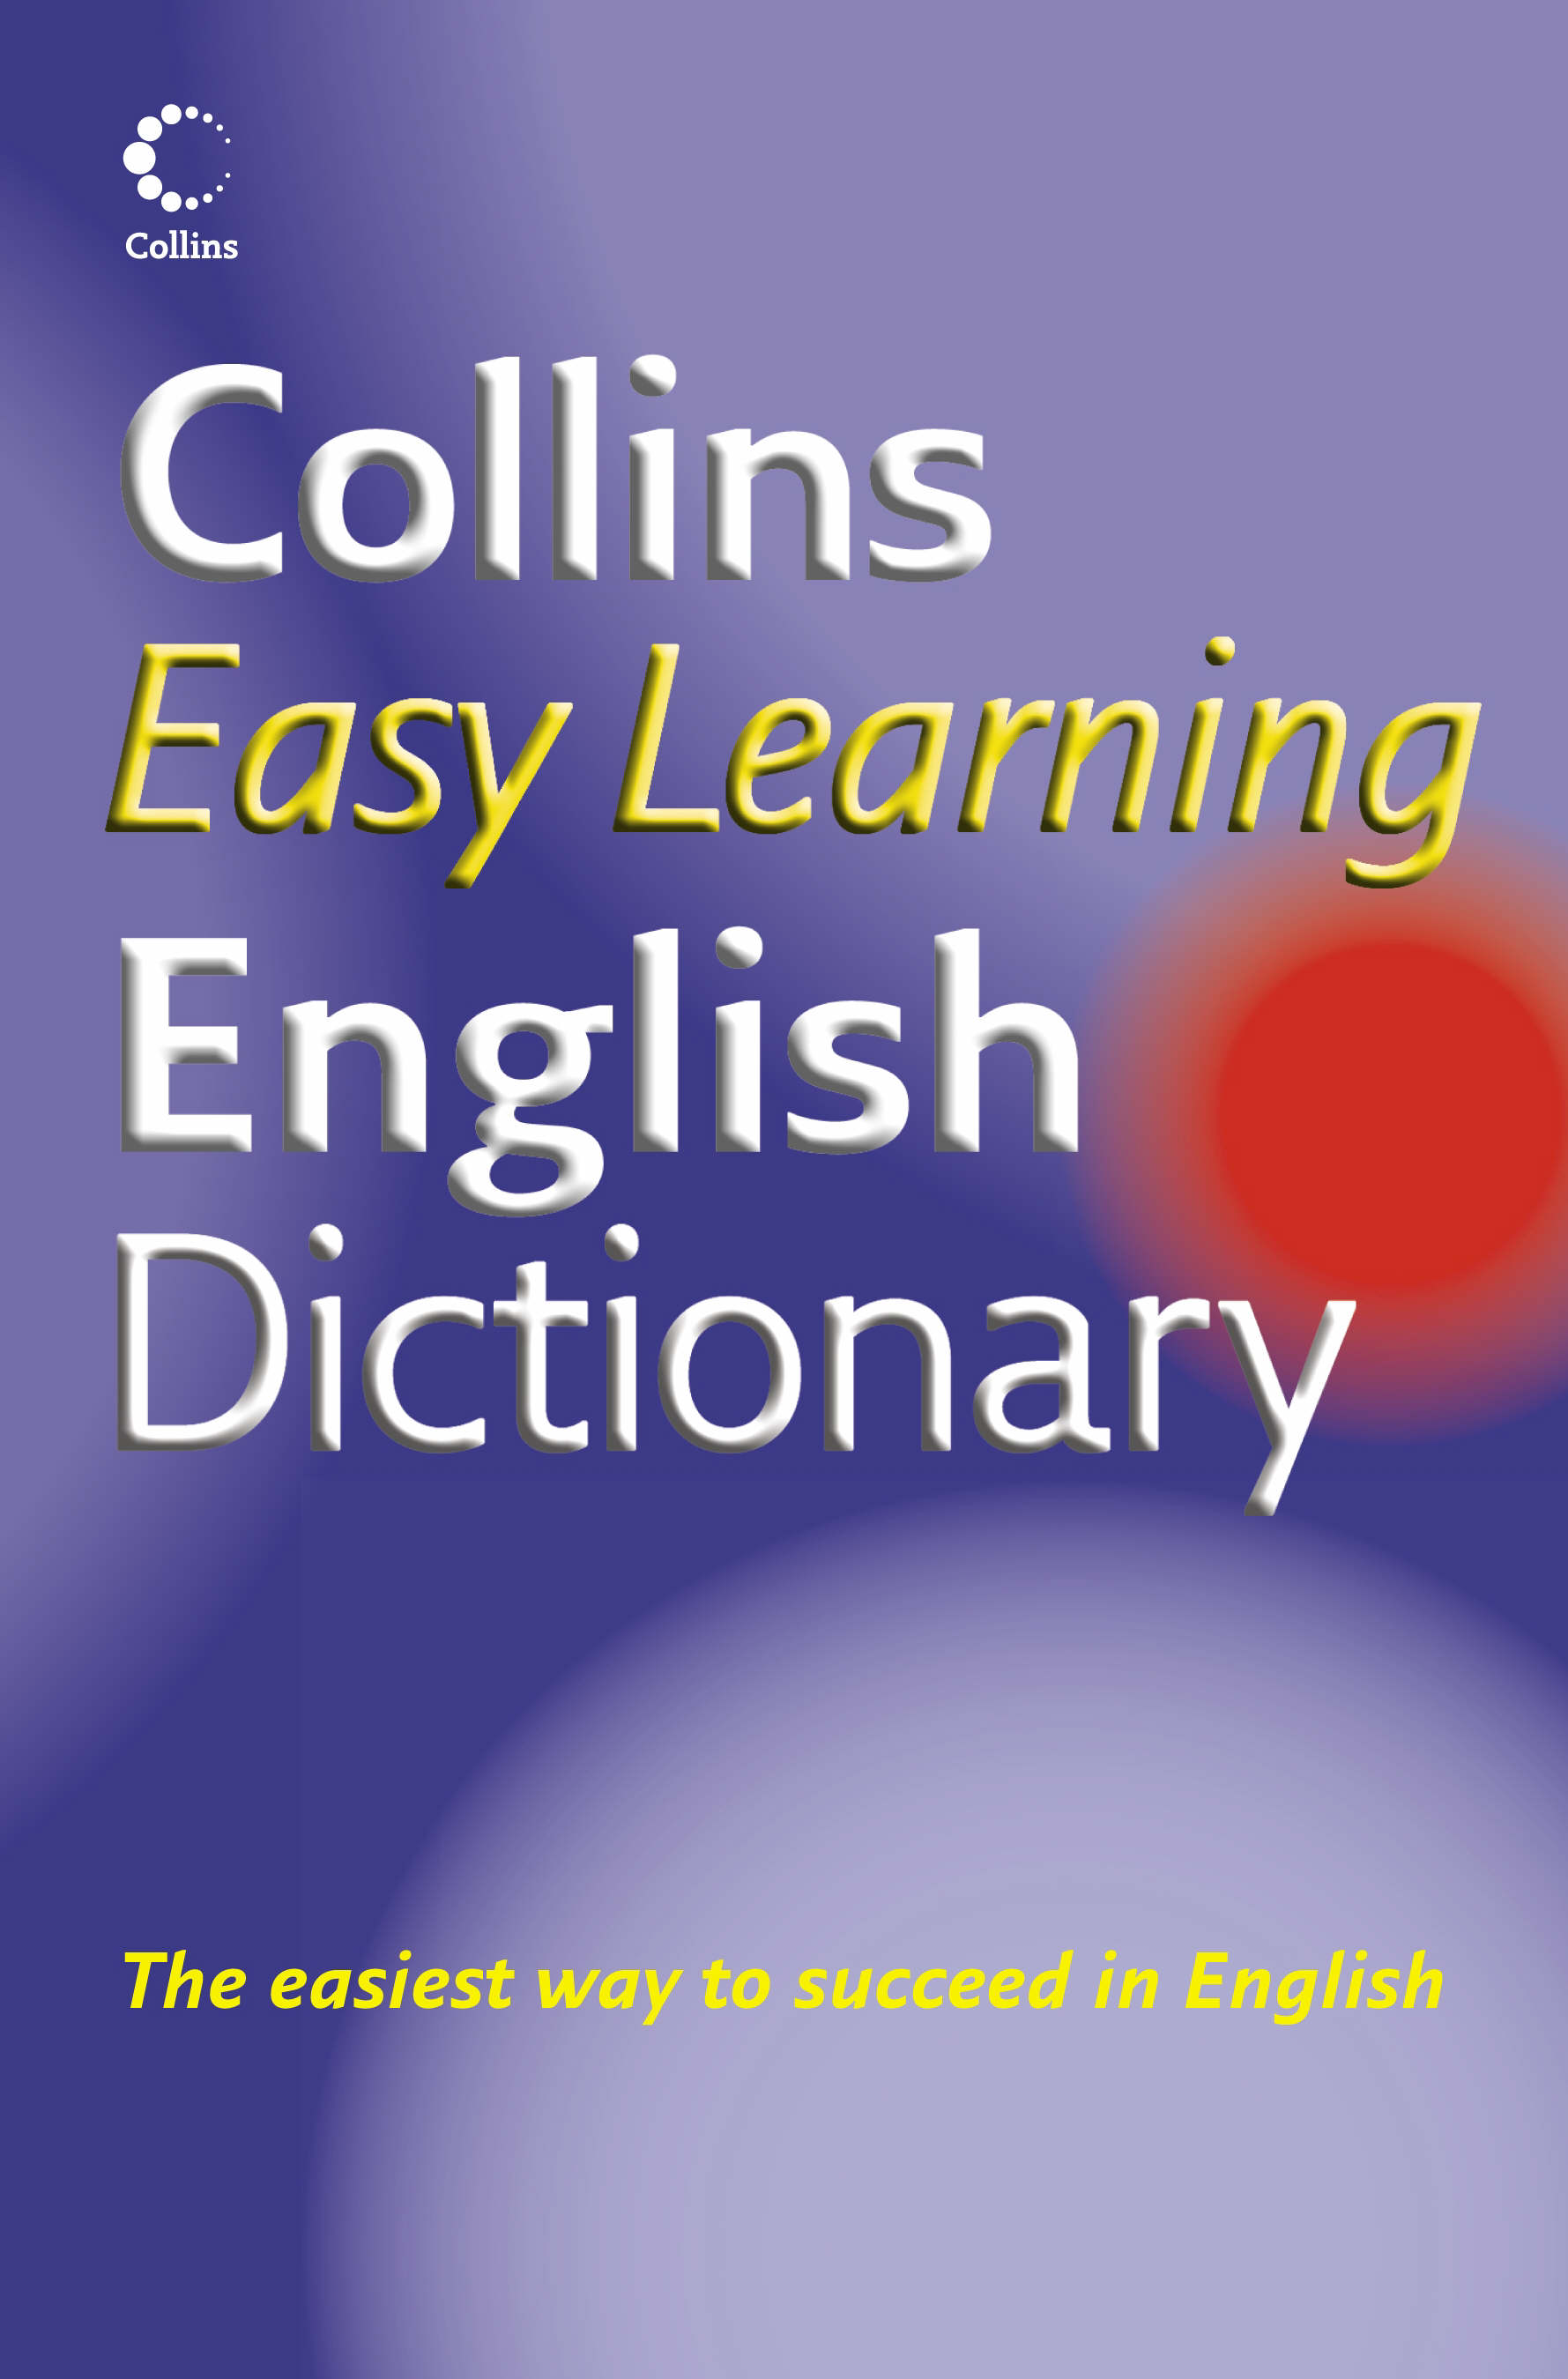 dissertation meaning in collins dictionary